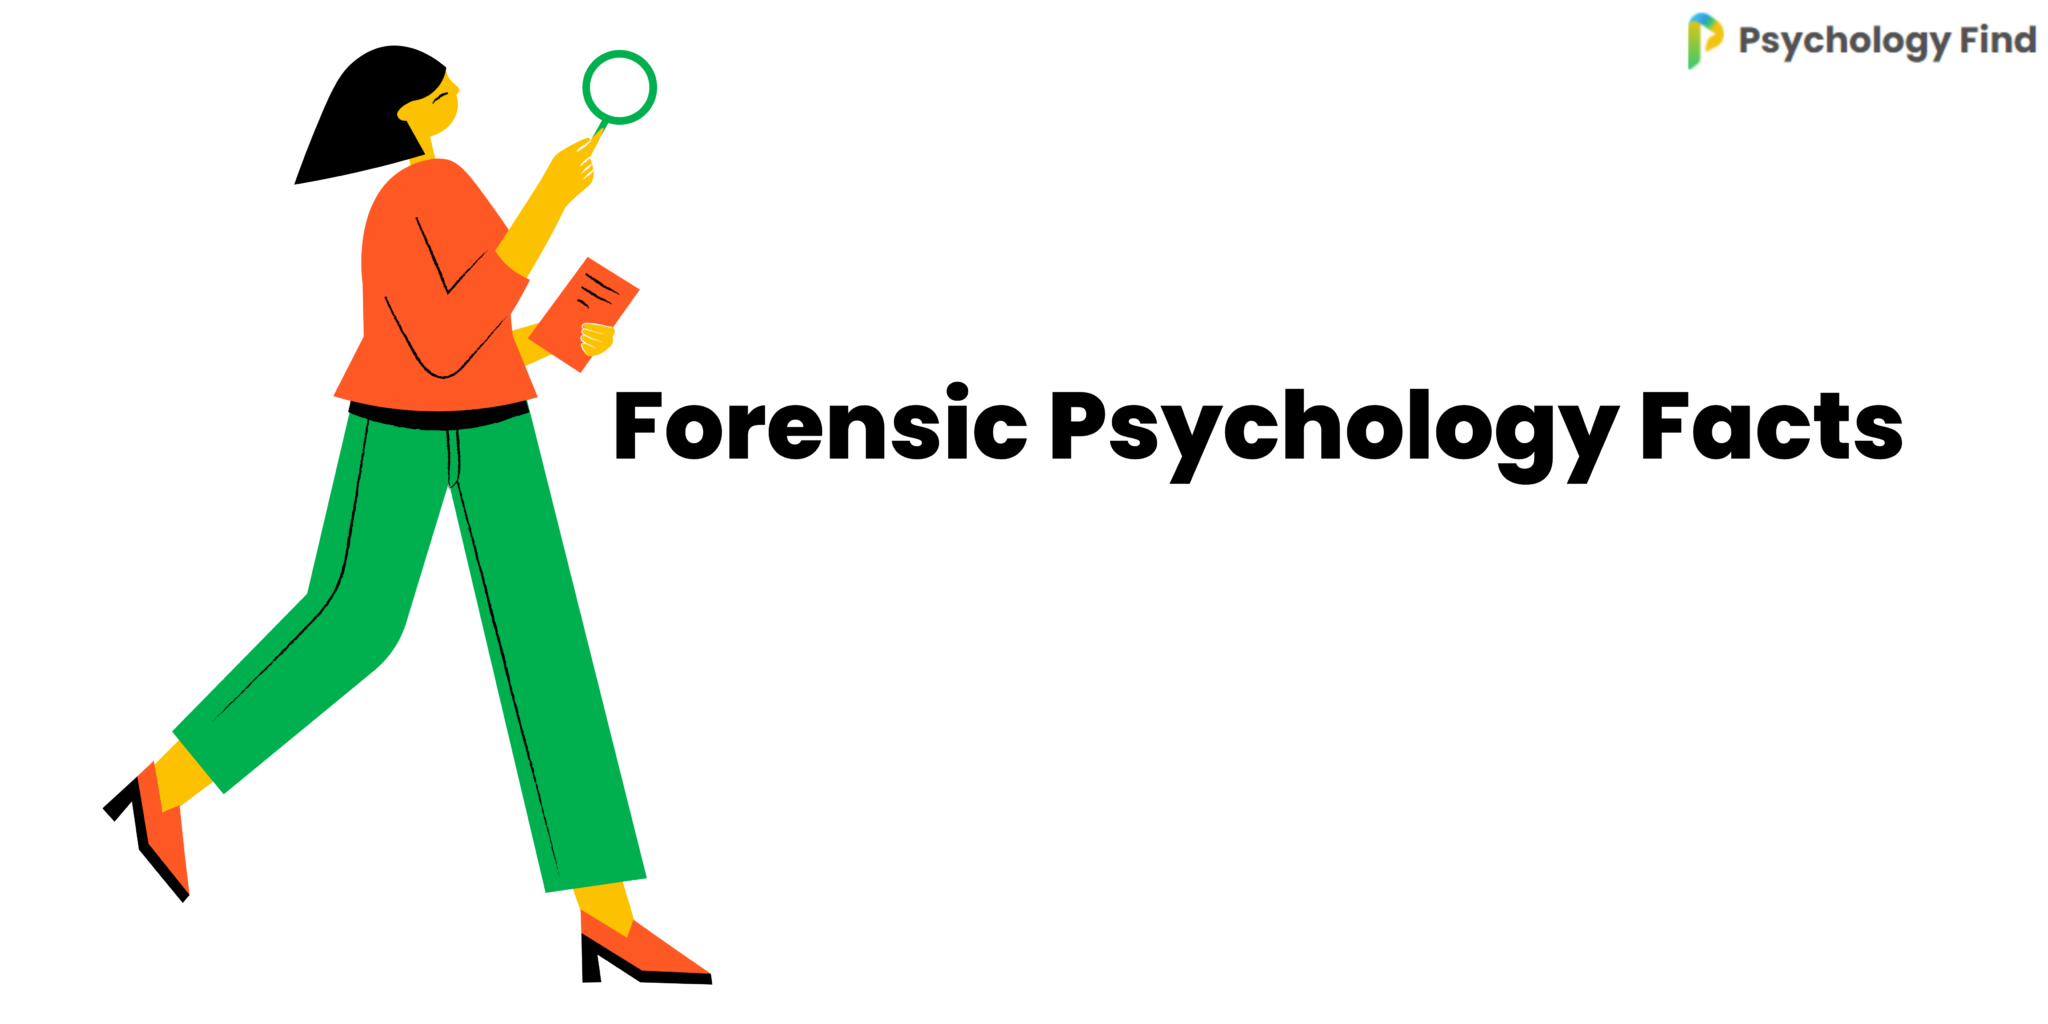 10 Fascinating Facts About Forensic Psychology Everyone Should Know.